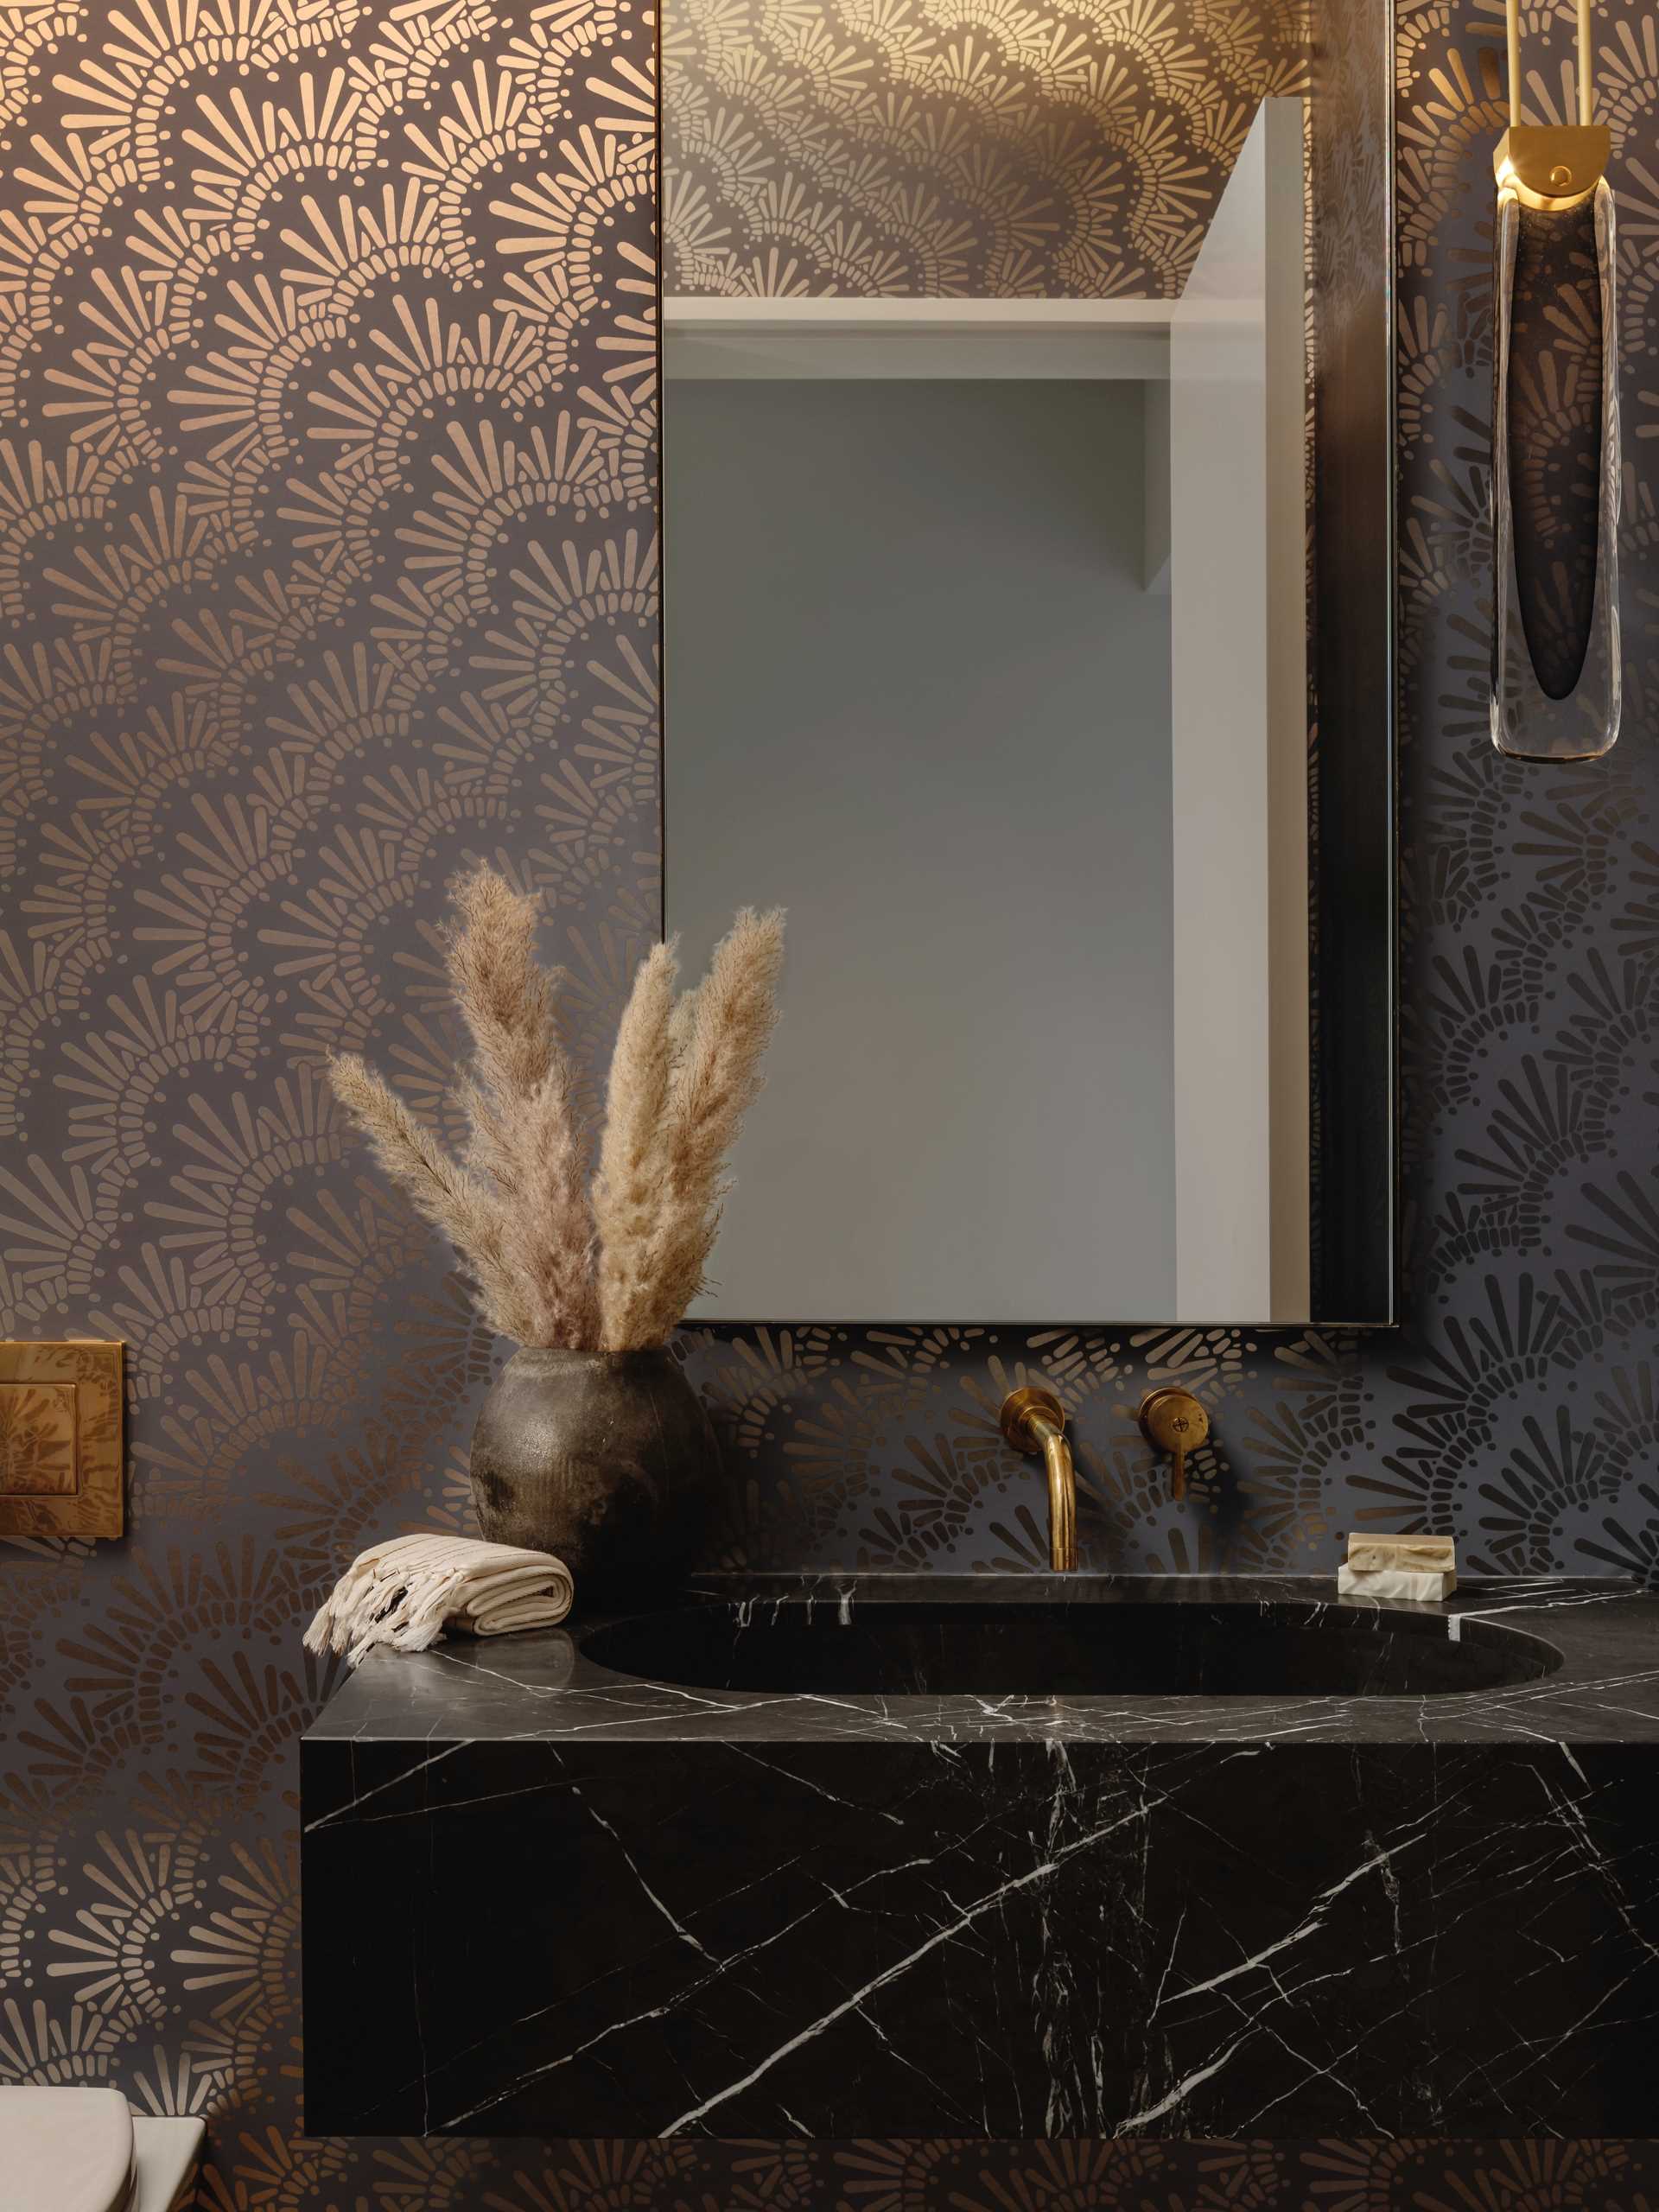 In this bathroom, a fun metallic wallpaper creates a unique look and complements the fixtures.